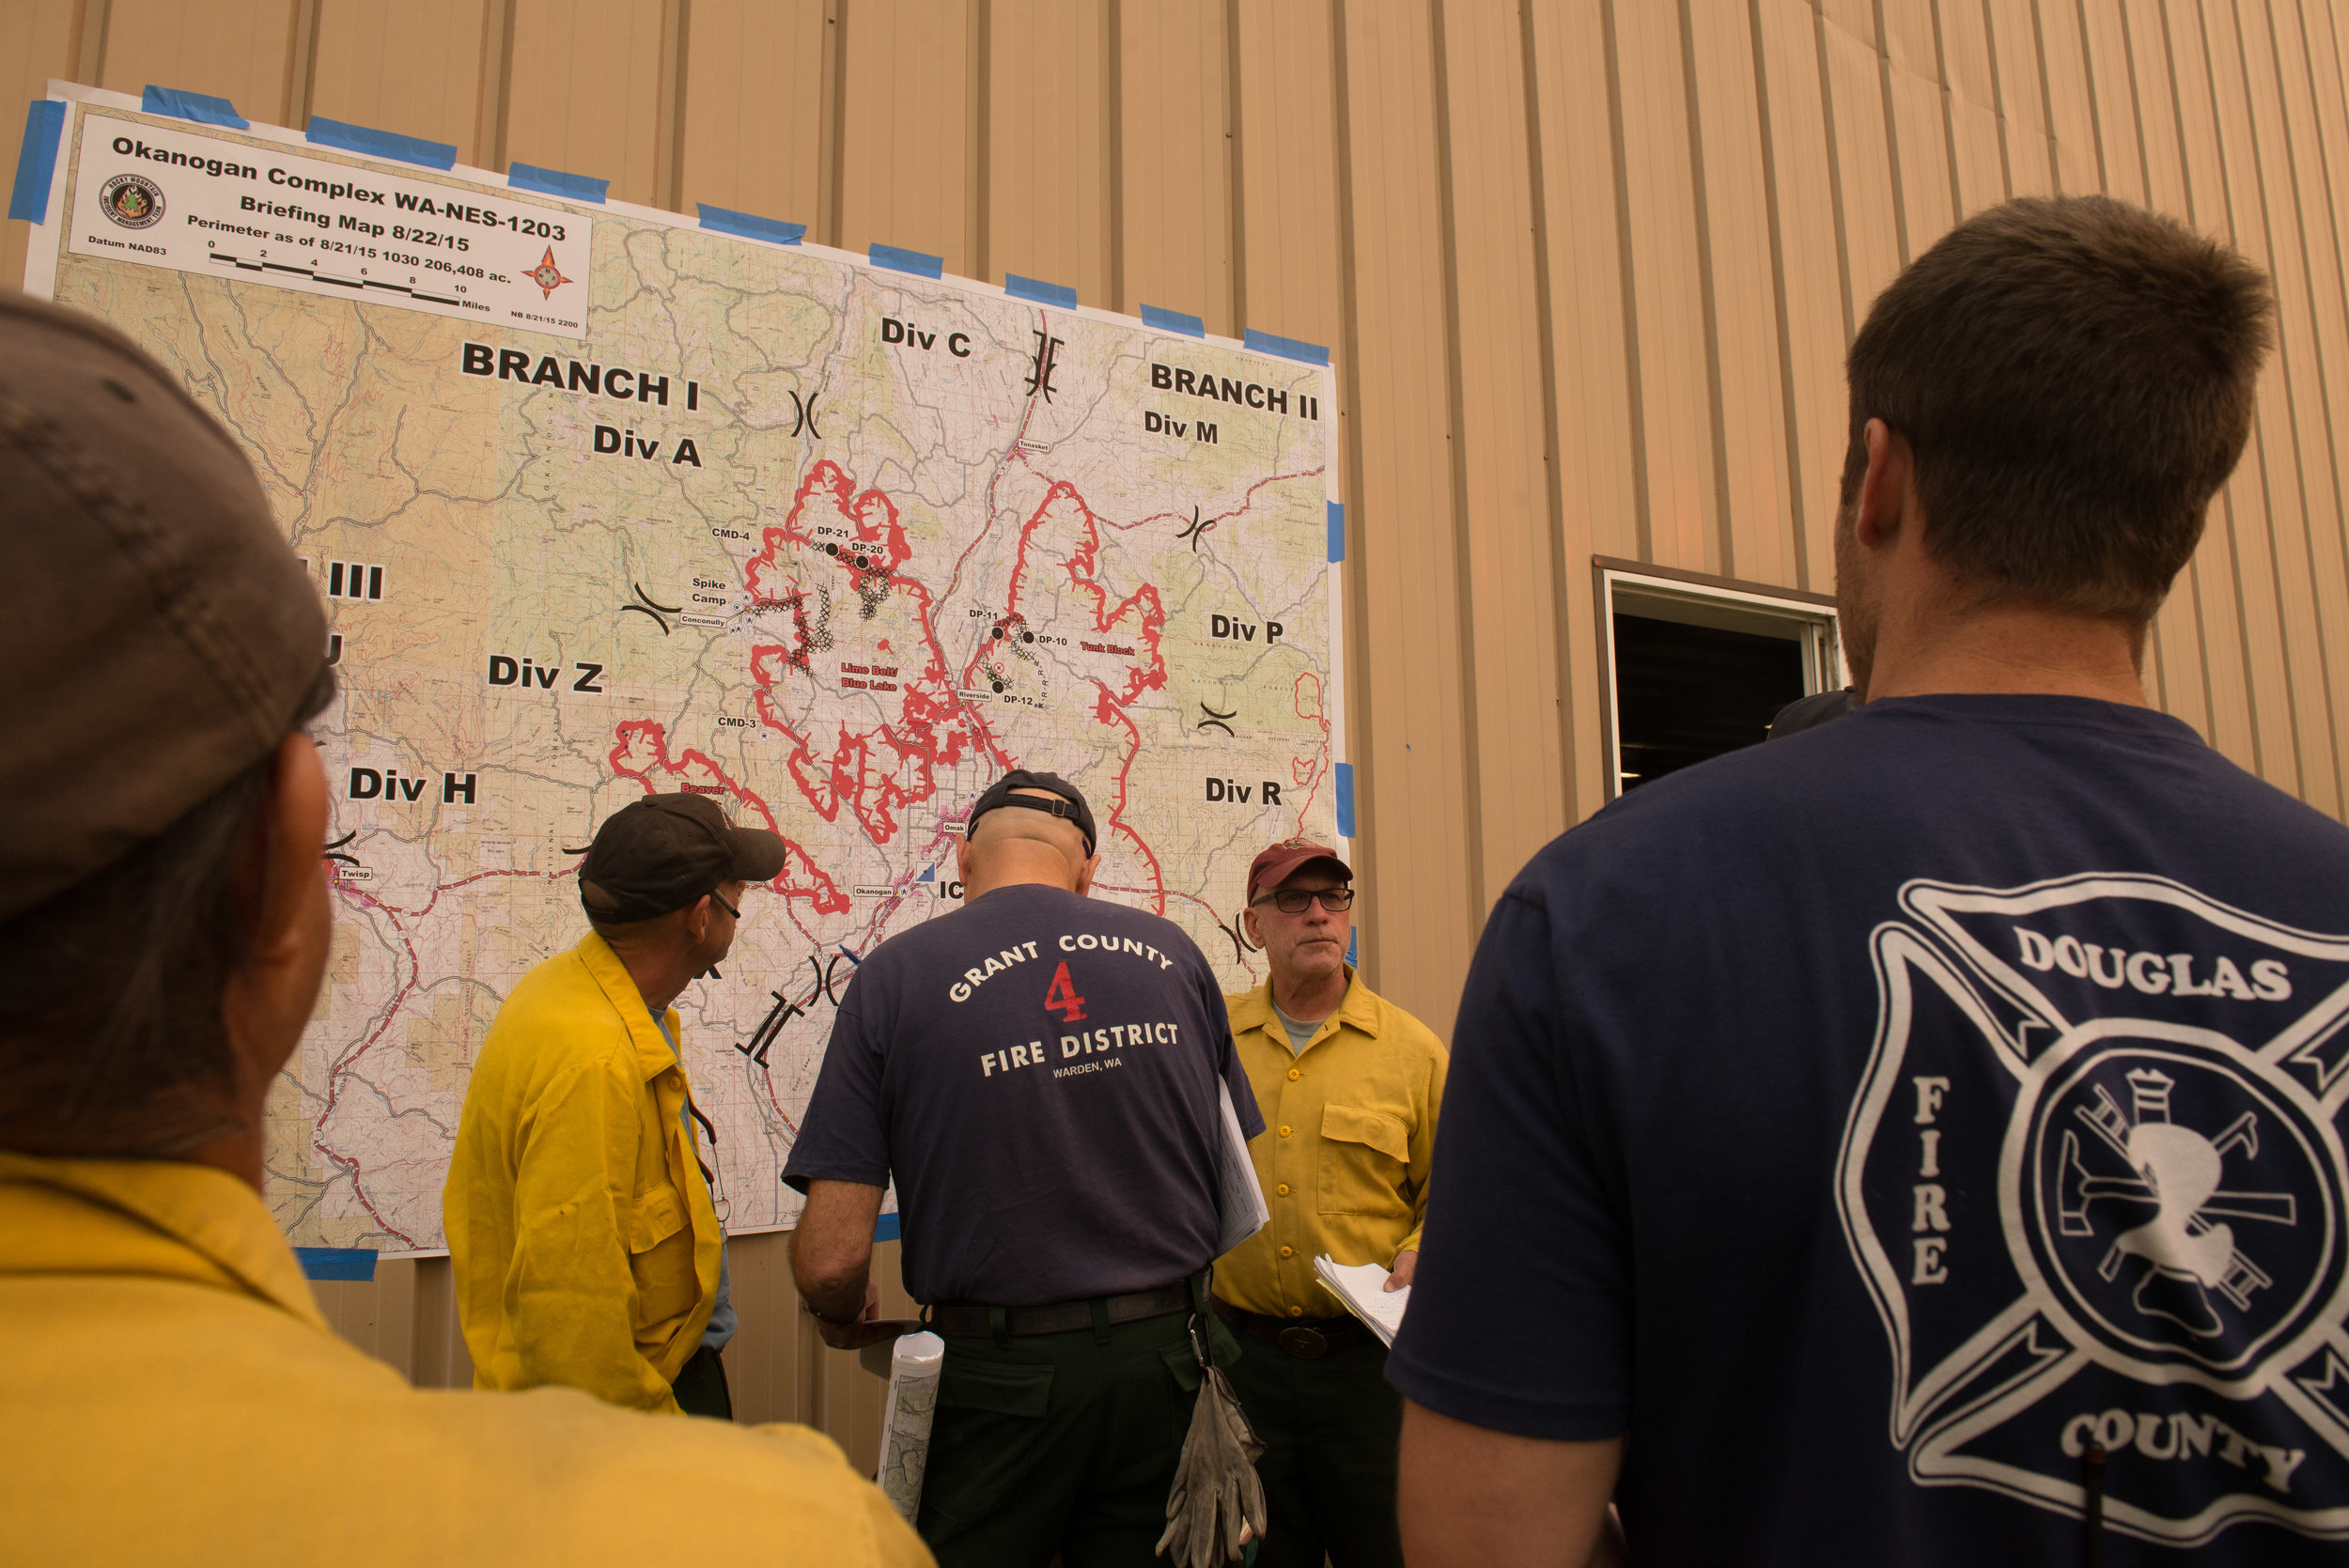  Firefighters are briefed on night shift assignments at the Incident Command Post Omak, Saturday August 22, 2015. Fire crews from around the United States, some from as far away as New Jersey, assemble here to receive their assignments before deployi